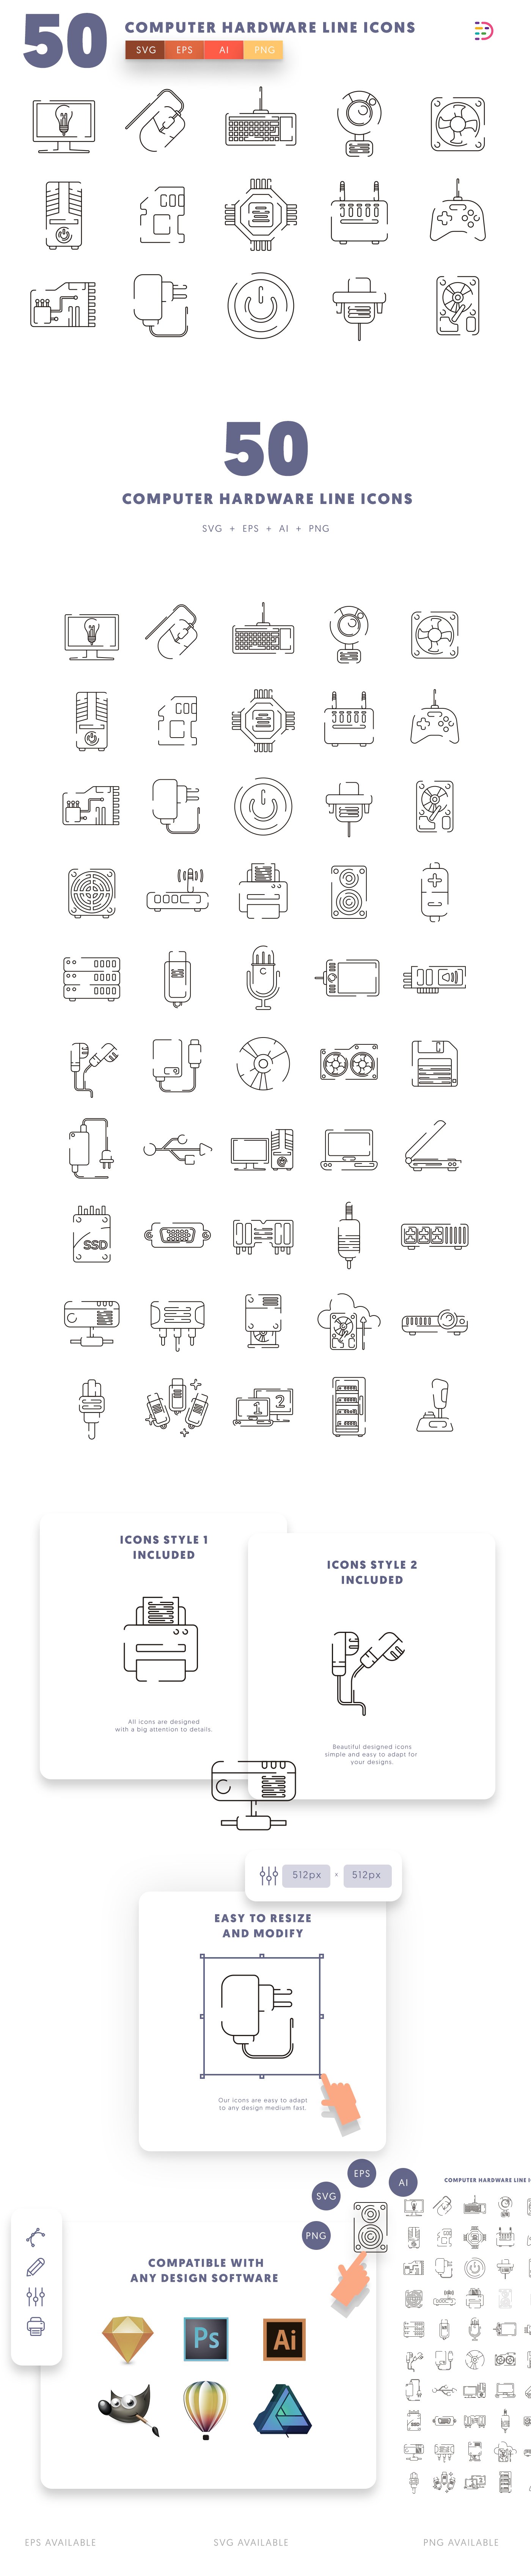 50 Computer Hardware Line Icons cover image.